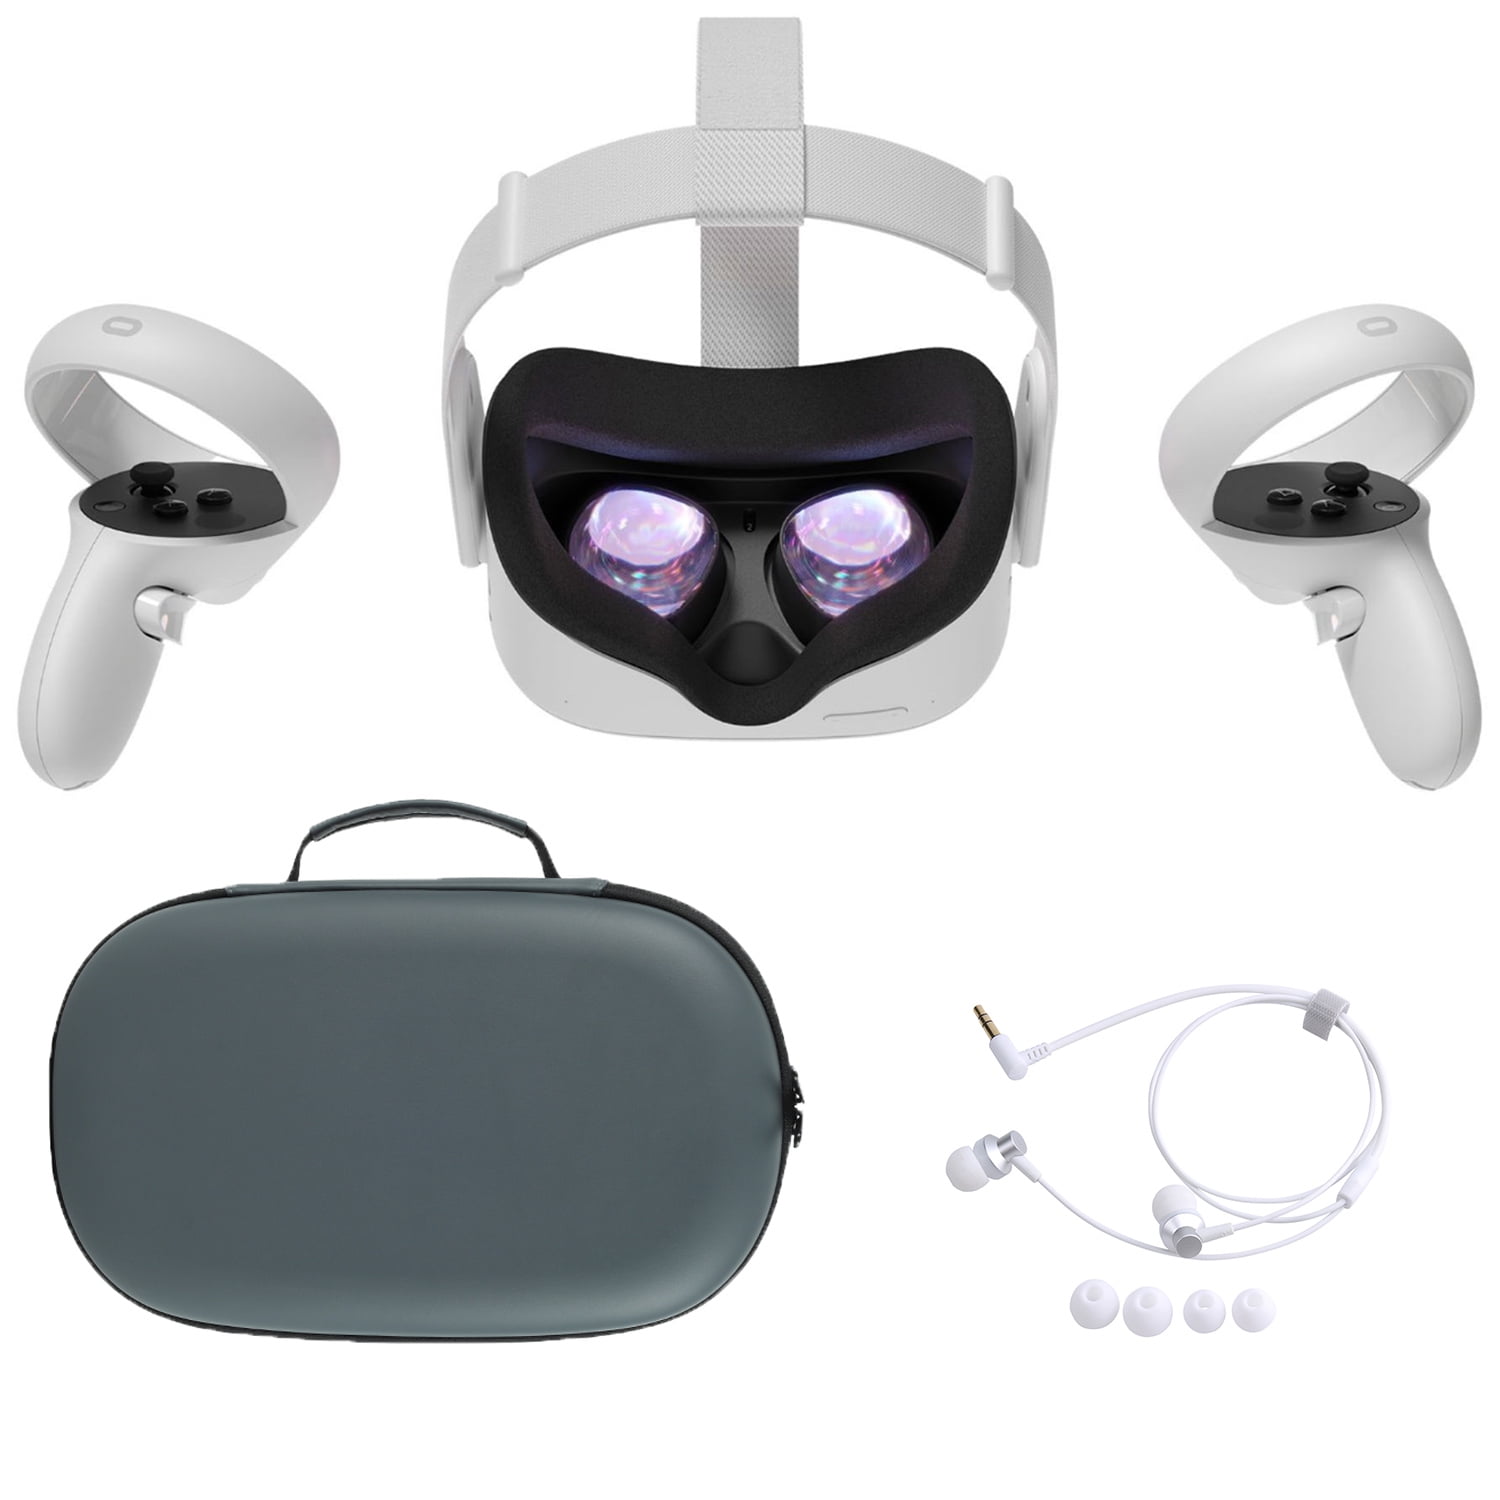 2020 Oculus Quest 2 All-In-One VR Headset, Touch Controllers, 256GB SSD